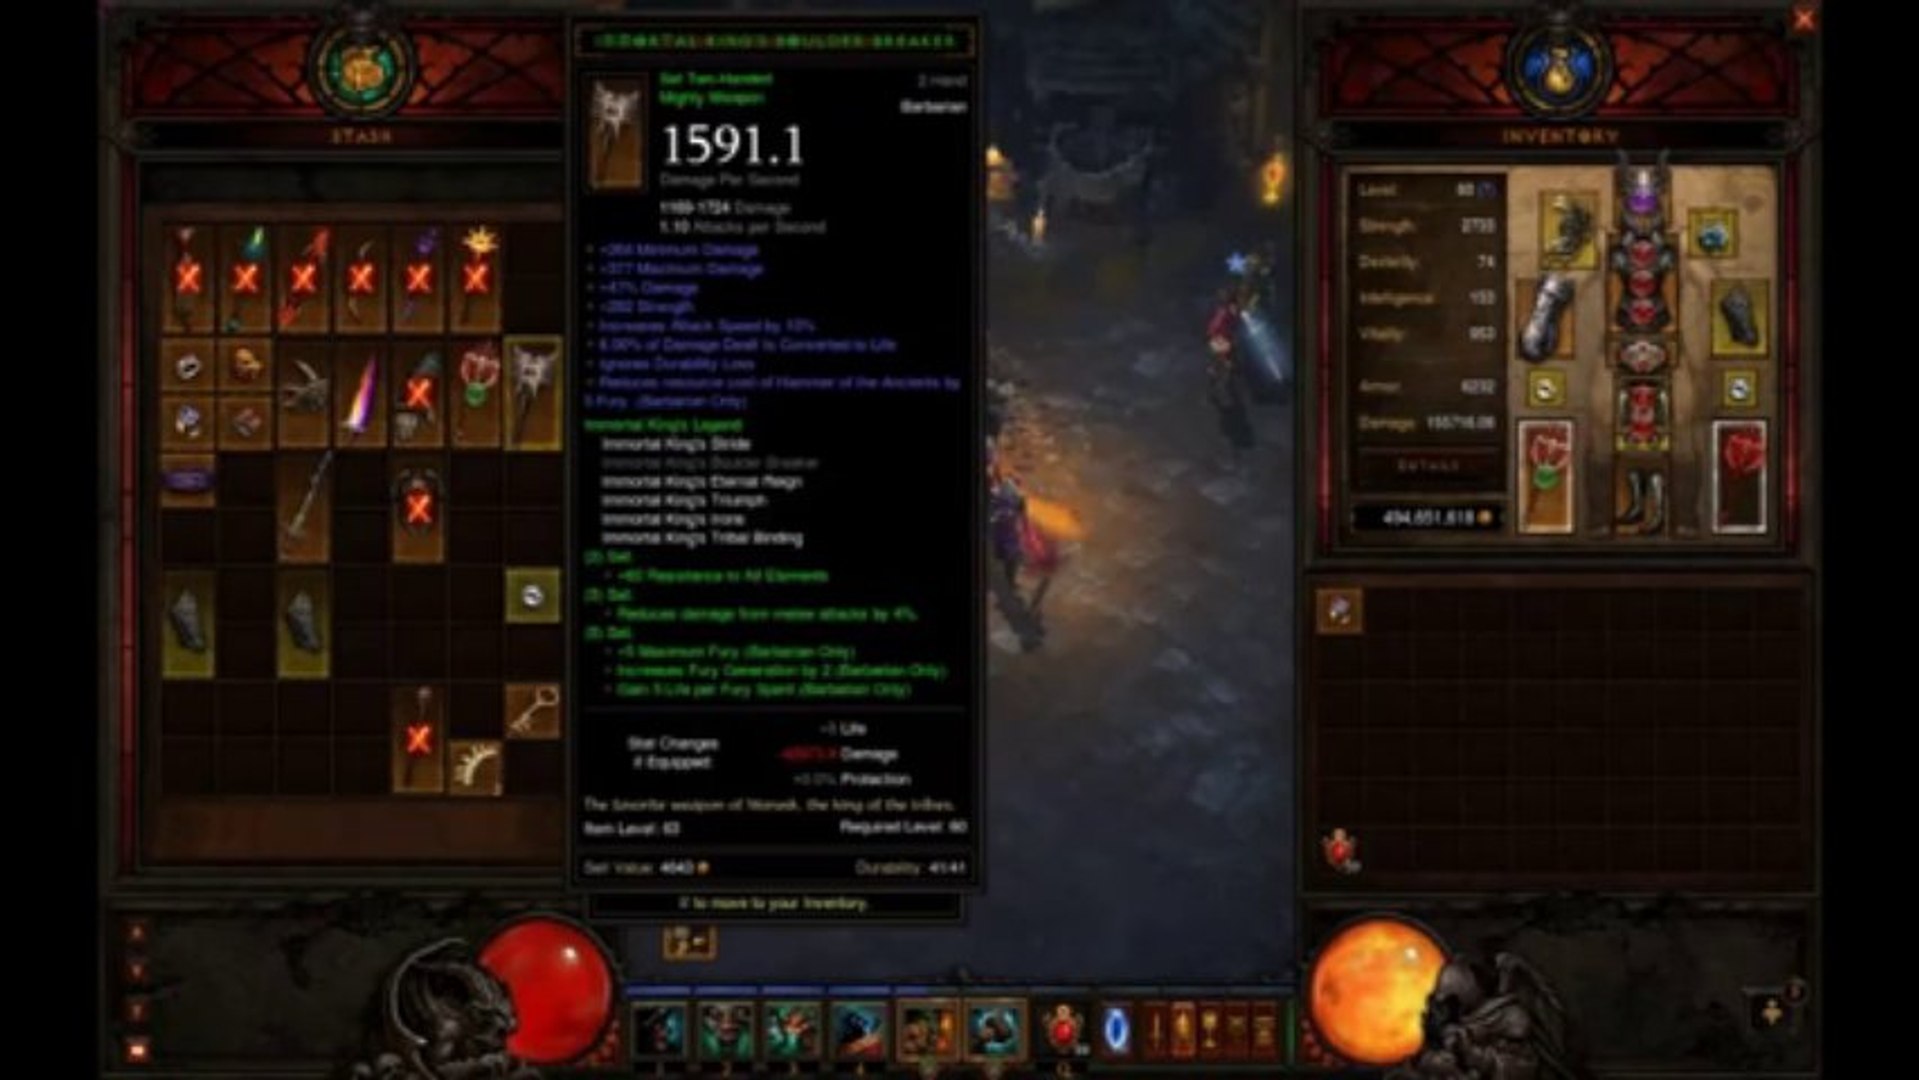 Diablo 3 Patch 1.08 Barbarian Hammer of the Ancients build guide for  massive 2 million point crits. - video Dailymotion